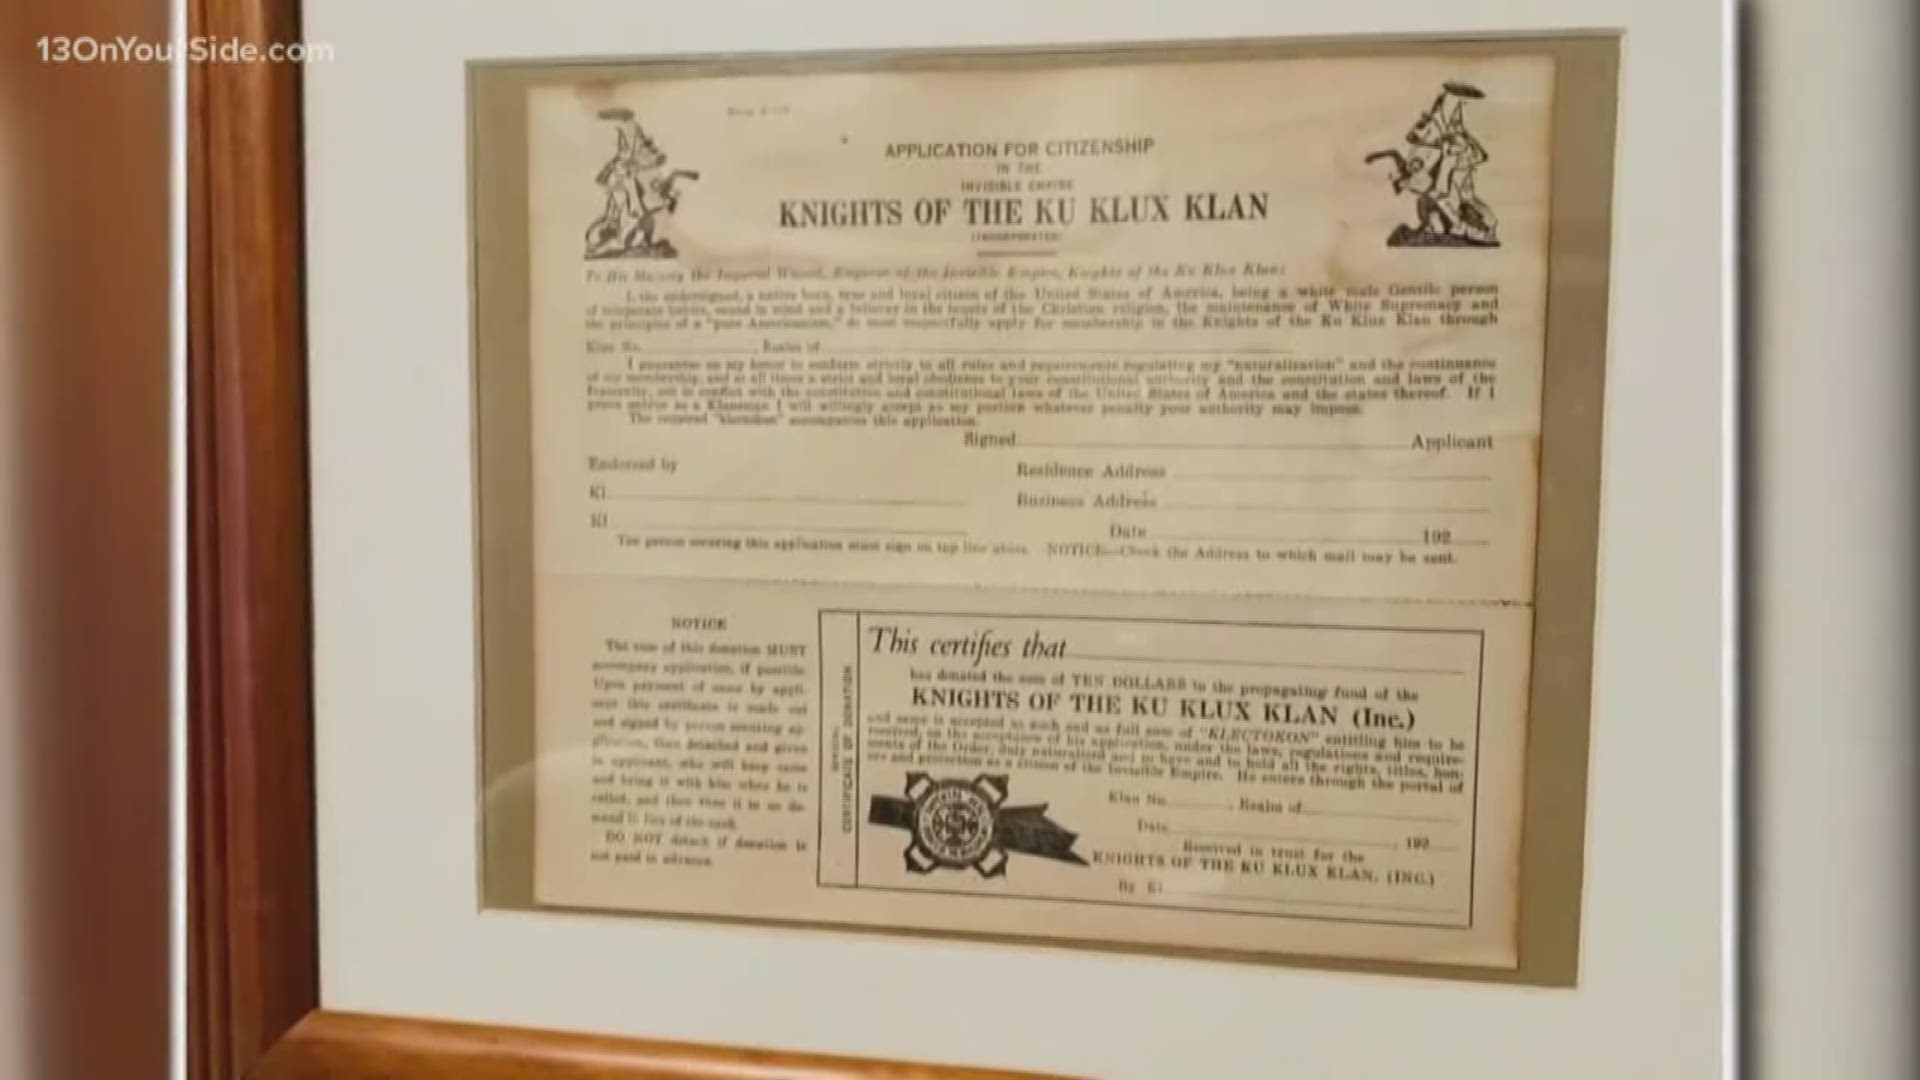 The officer at the center of a Ku Klux Klan memorabilia controversy has been placed on administrative pending the outcome of an investigation.